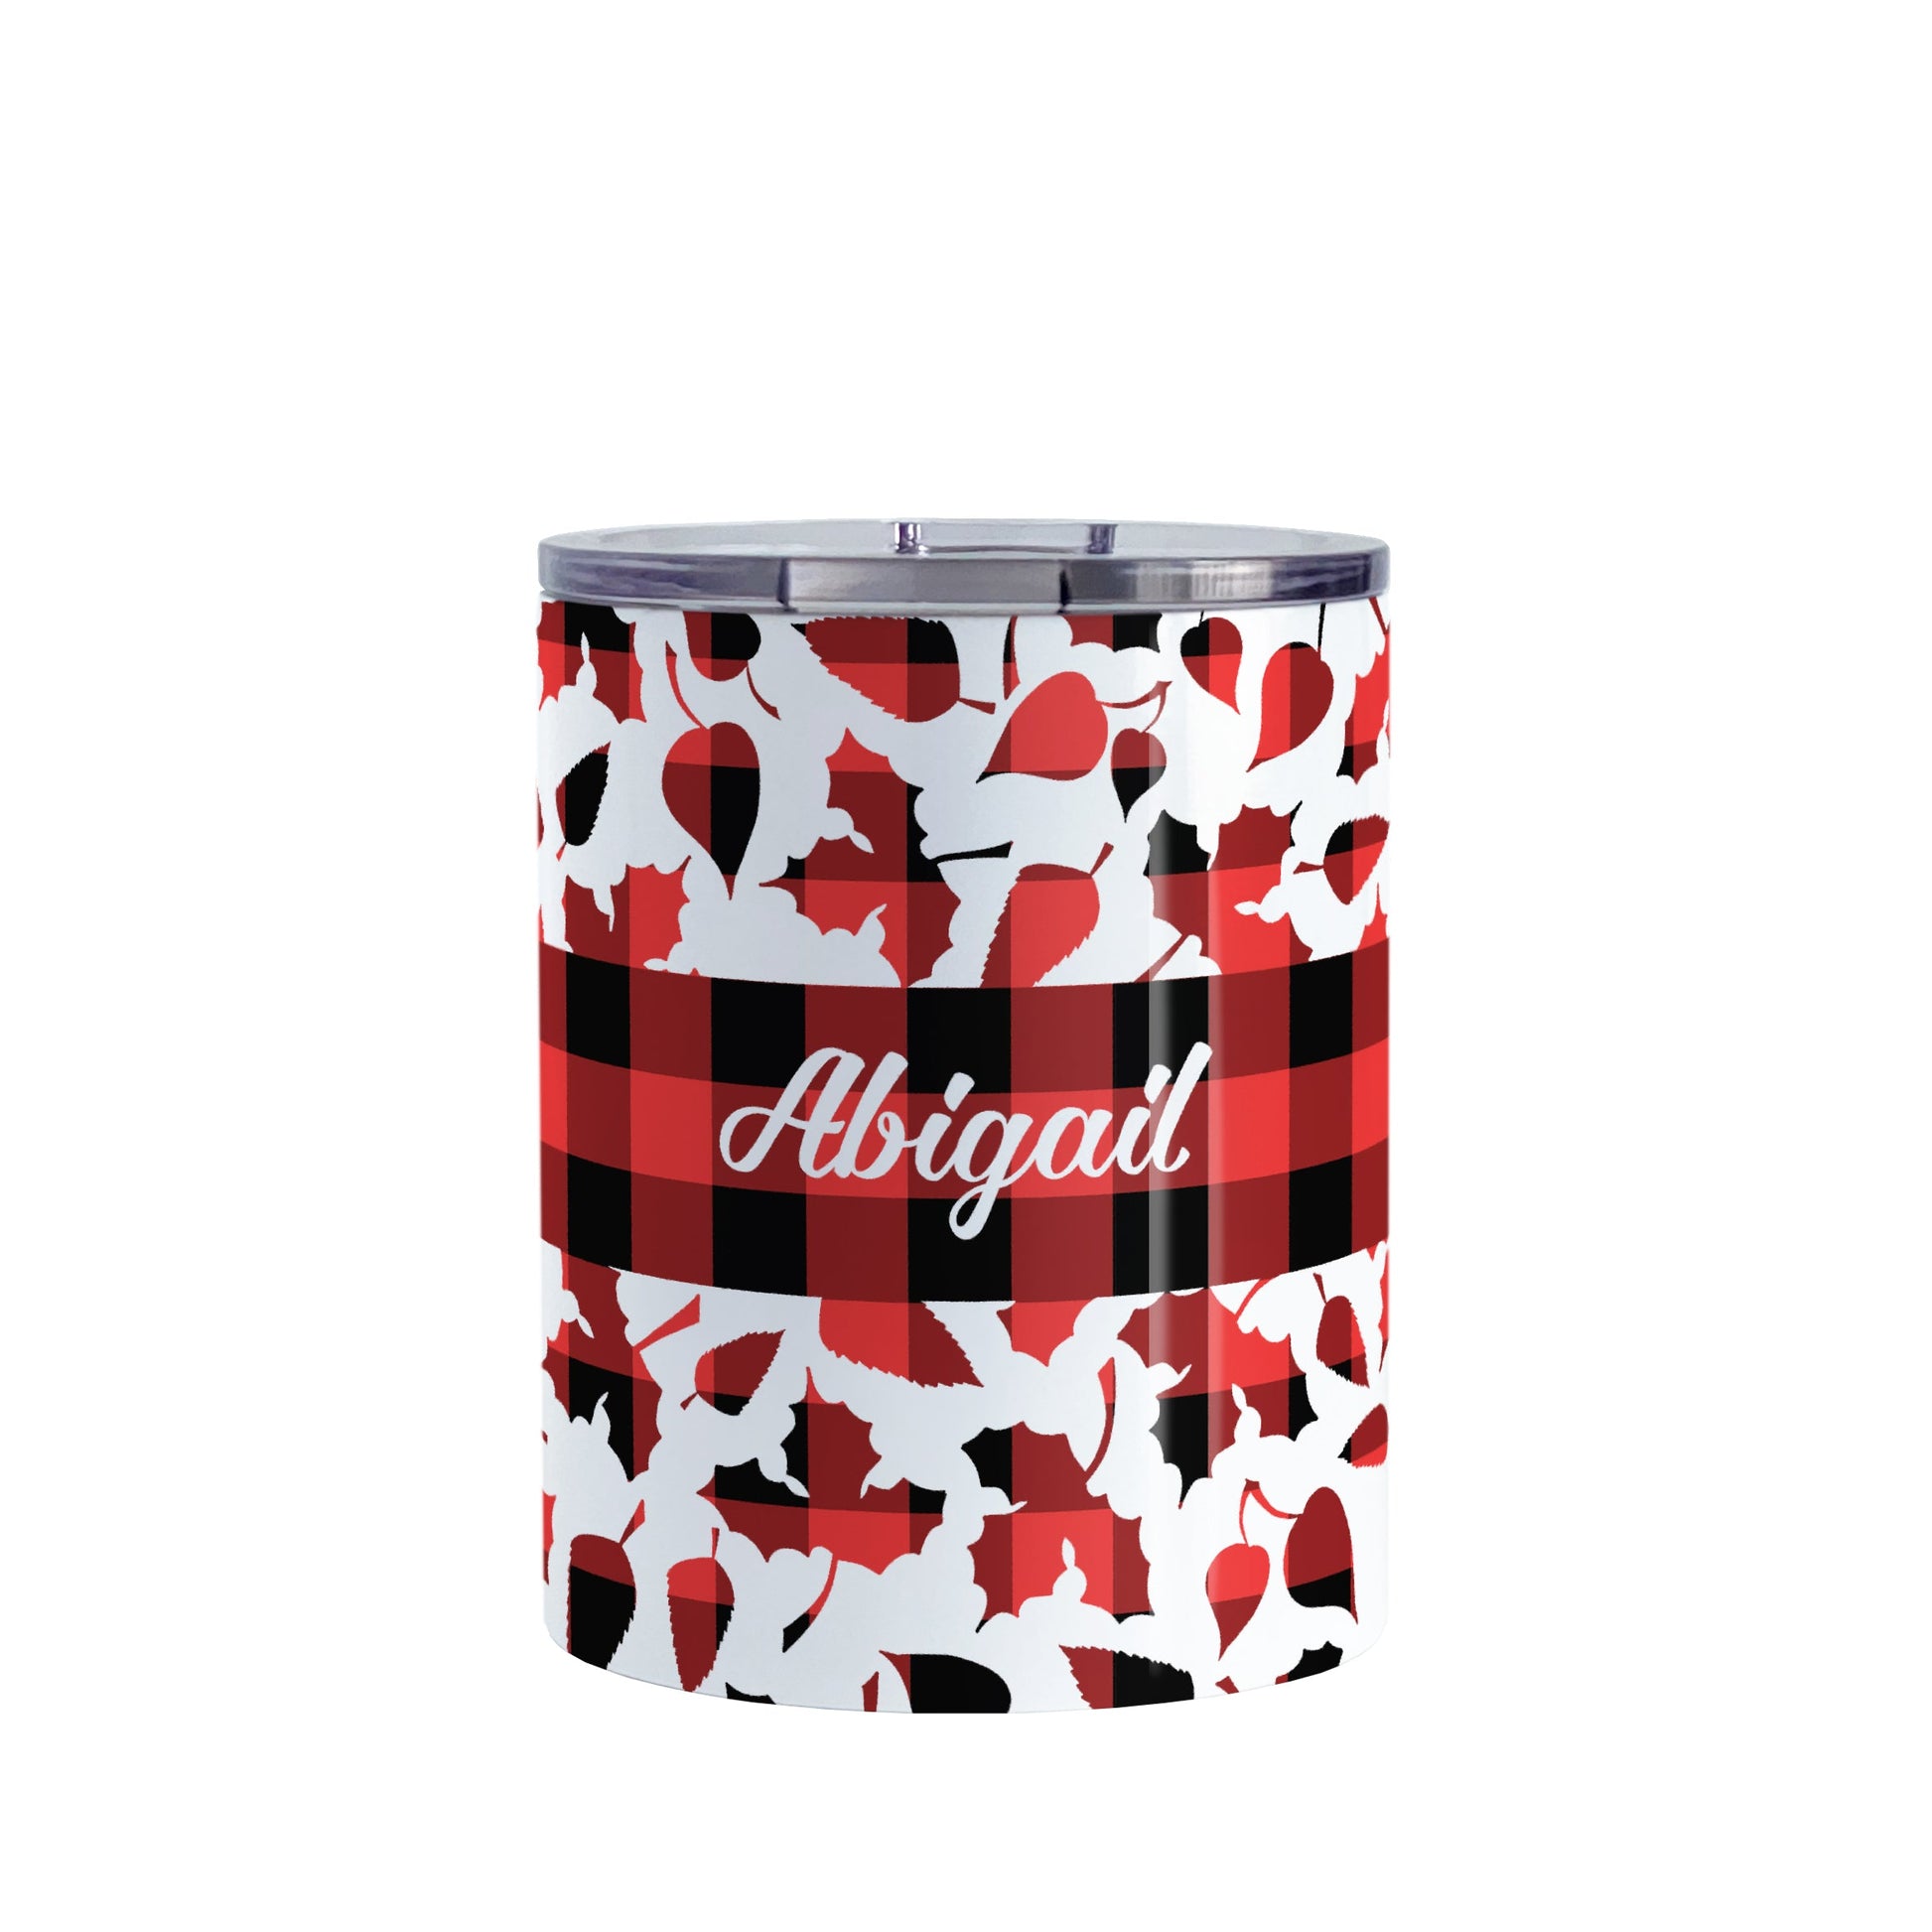 Personalized Buffalo Plaid Leaves Fall Tumbler Cup (10oz) at Amy's Coffee Mugs. A stainless steel insulated tumbler cup designed with a pattern of leaves with a red and black buffalo plaid pattern that wraps around the cup. There is a buffalo plaid stripe over middle area of the leaves with your name custom printed in a white script font.